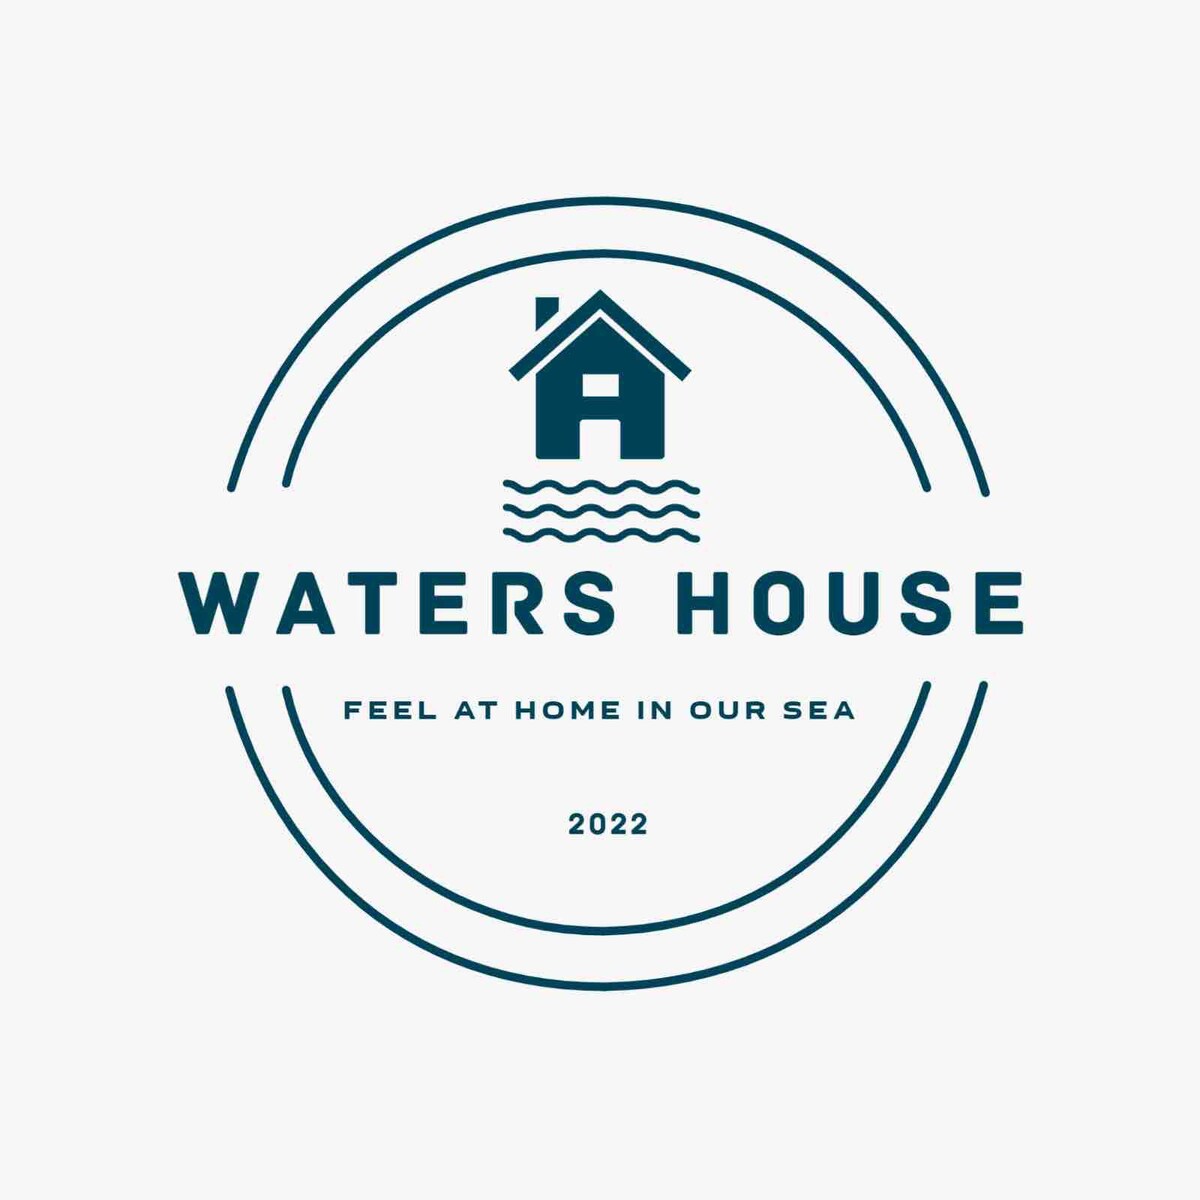 WATERS HOUSE - Feel at Home ir our Sea